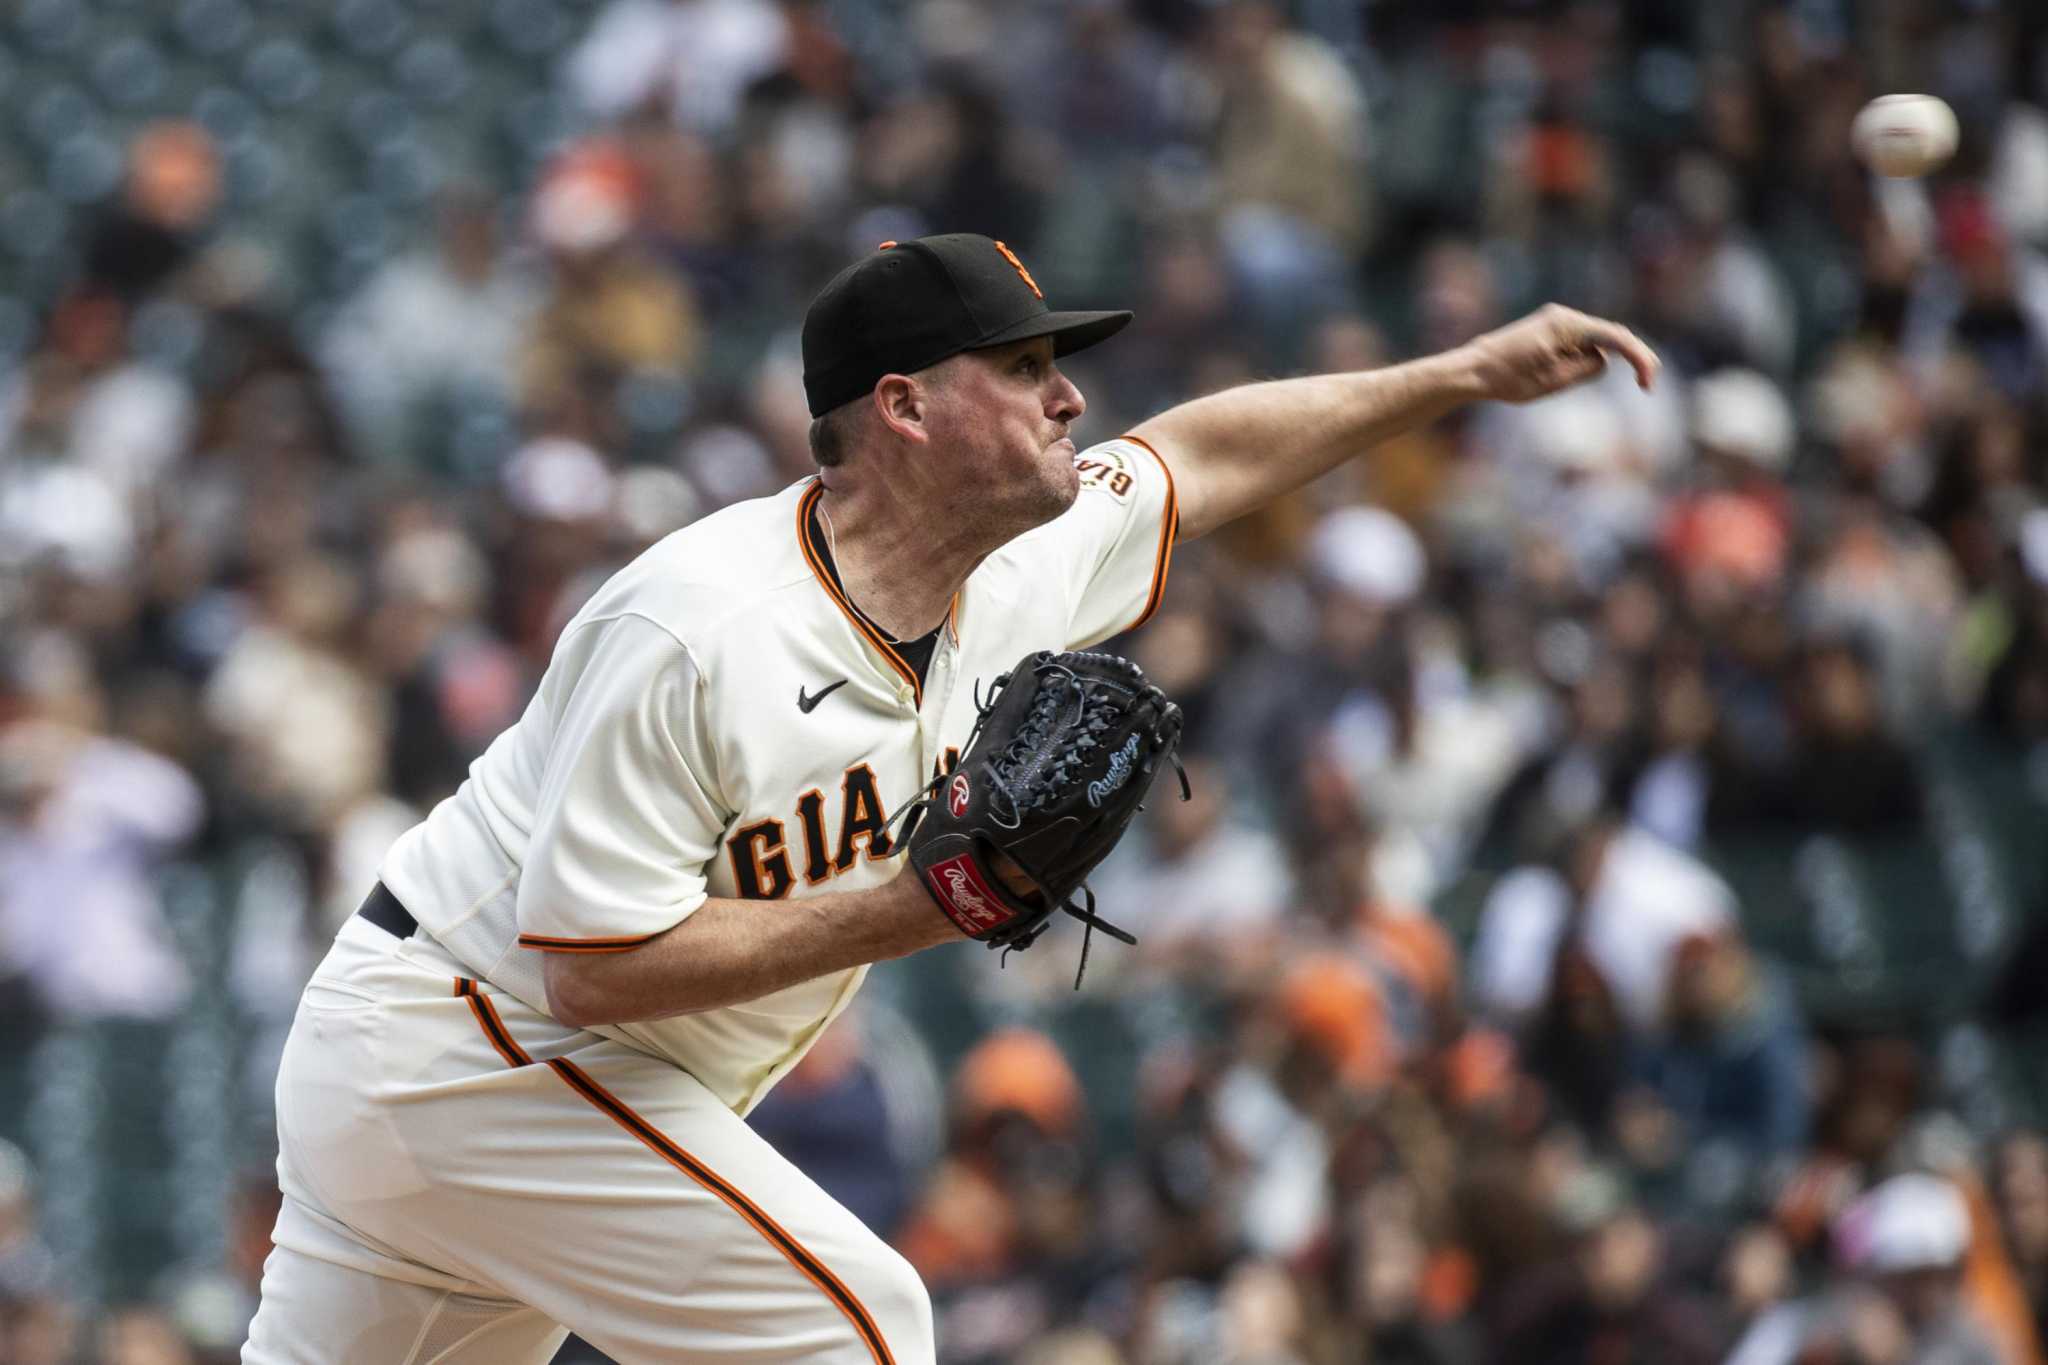 Look on the Giants' 2020 ZiPS projections and despair - McCovey